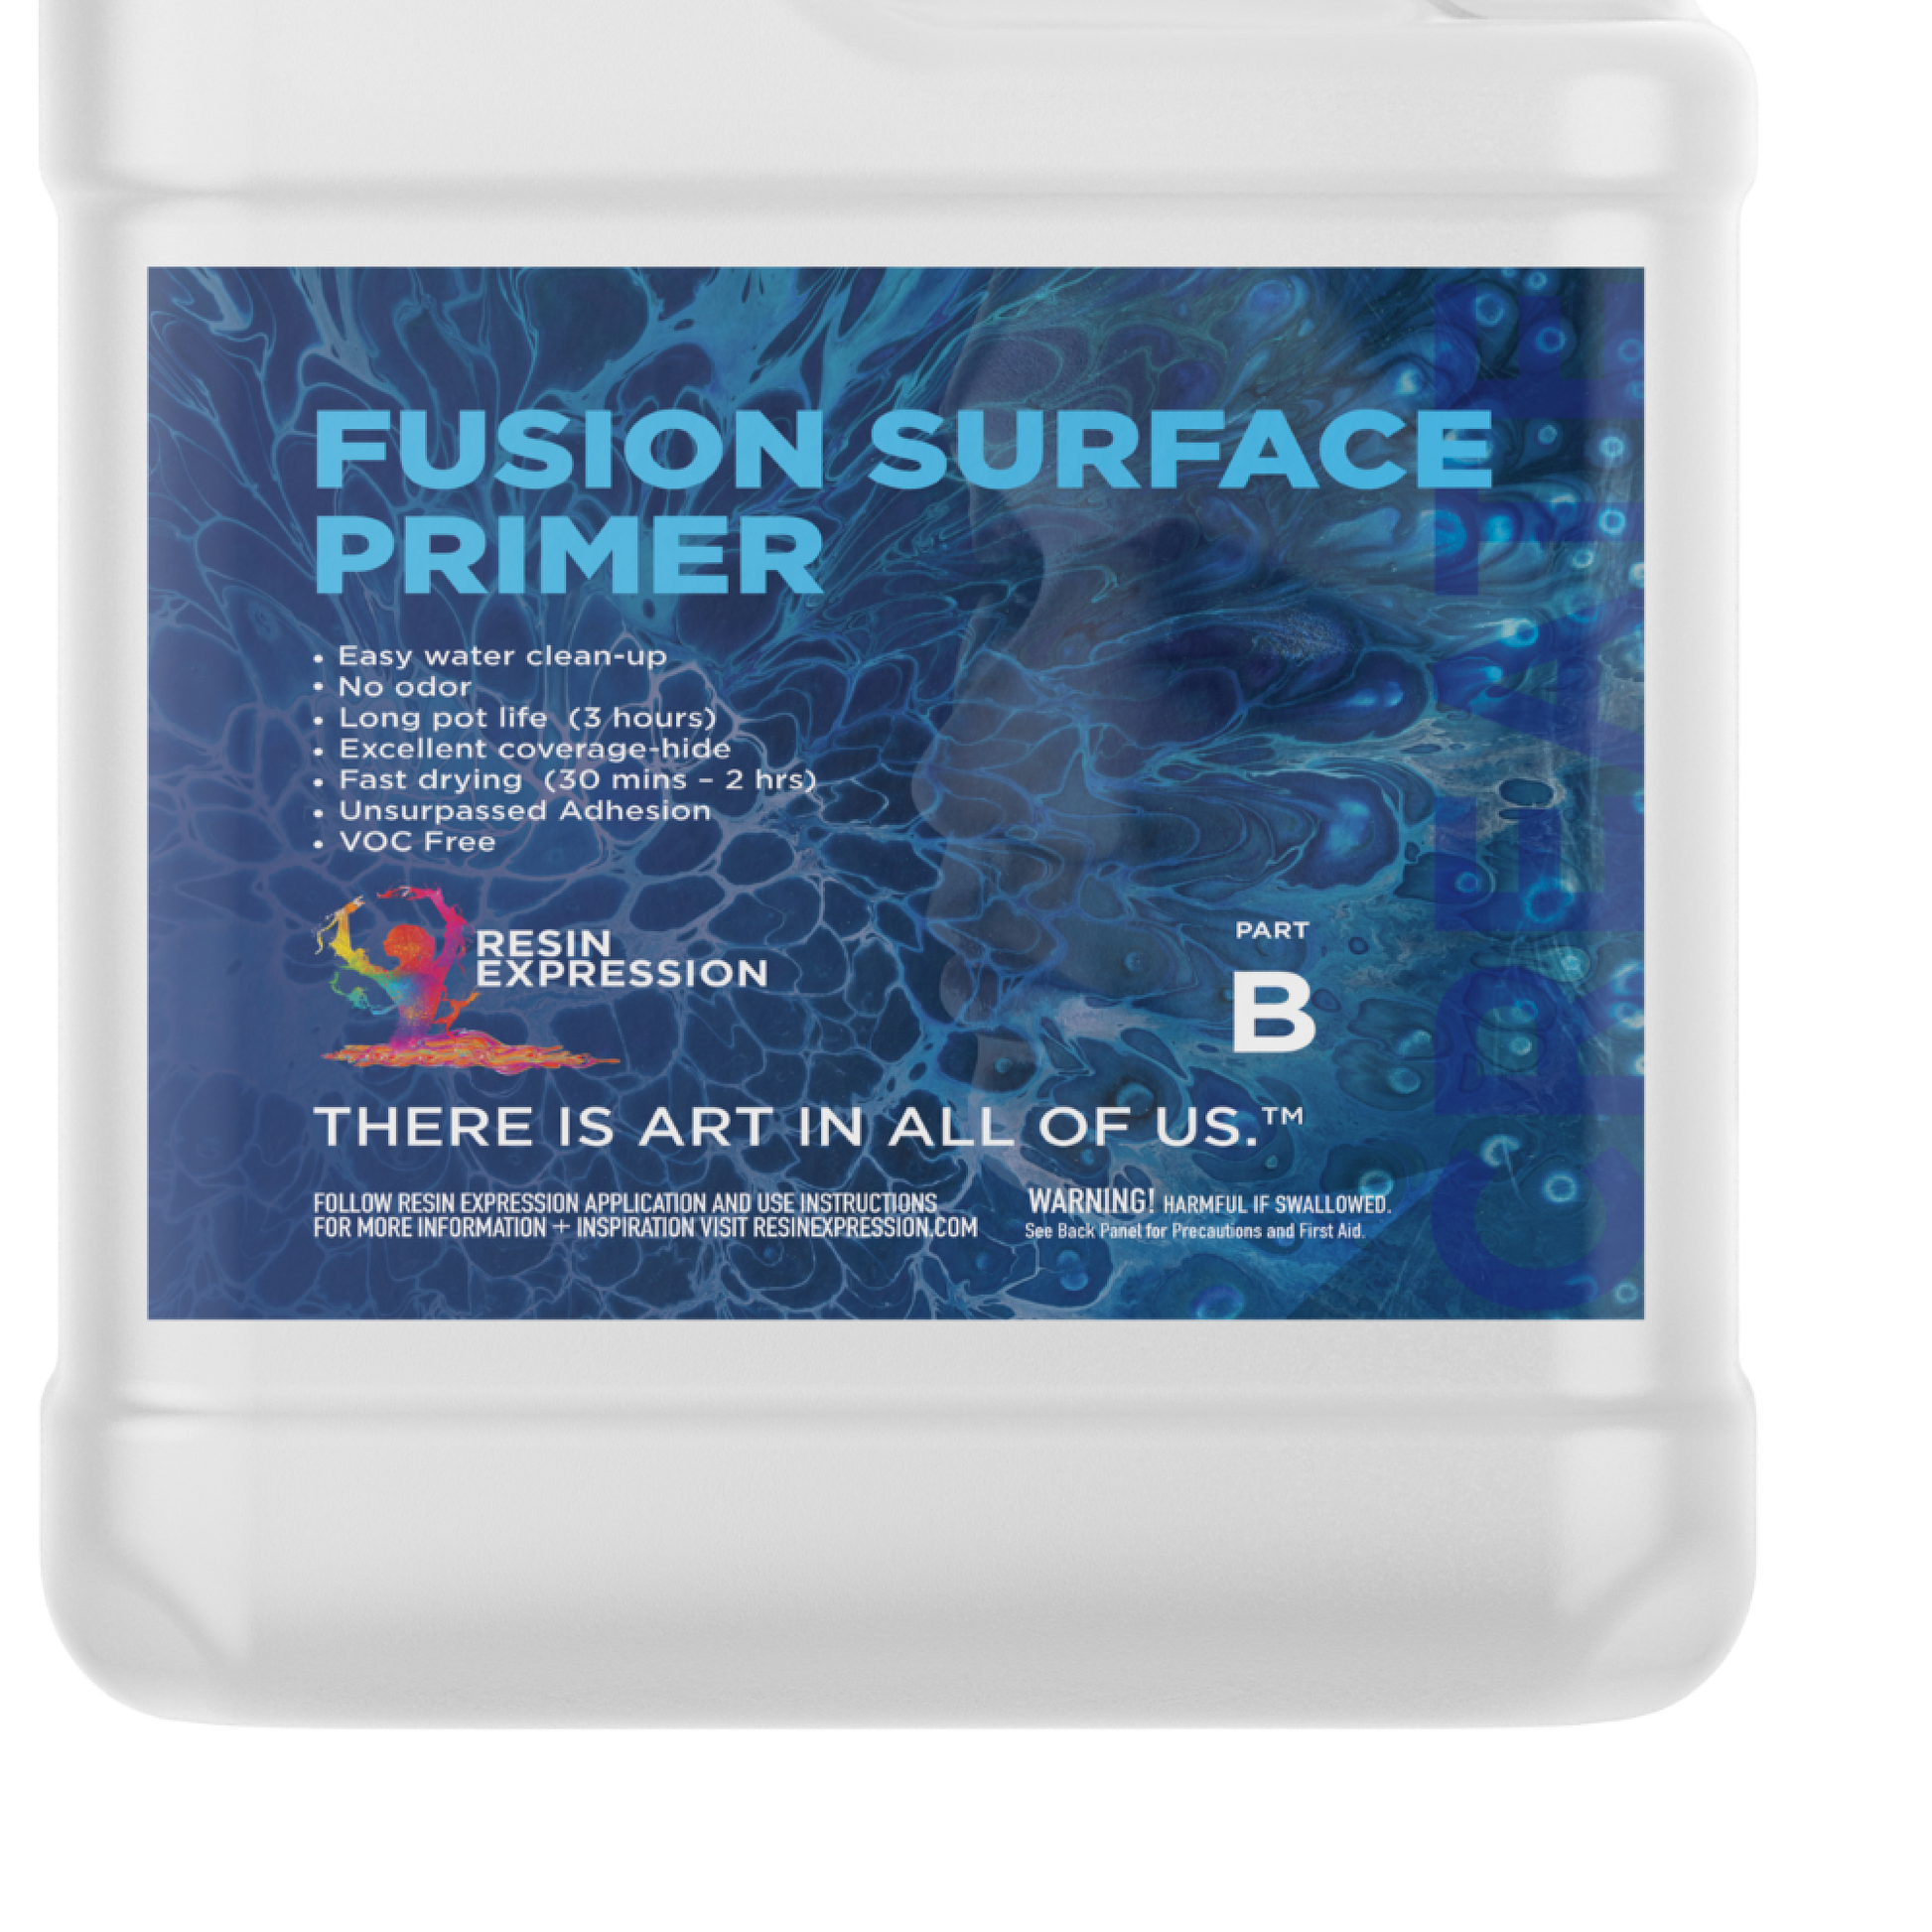 Base Perfection: Fusion Primer ensuring coverage up to 50 sq. ft.